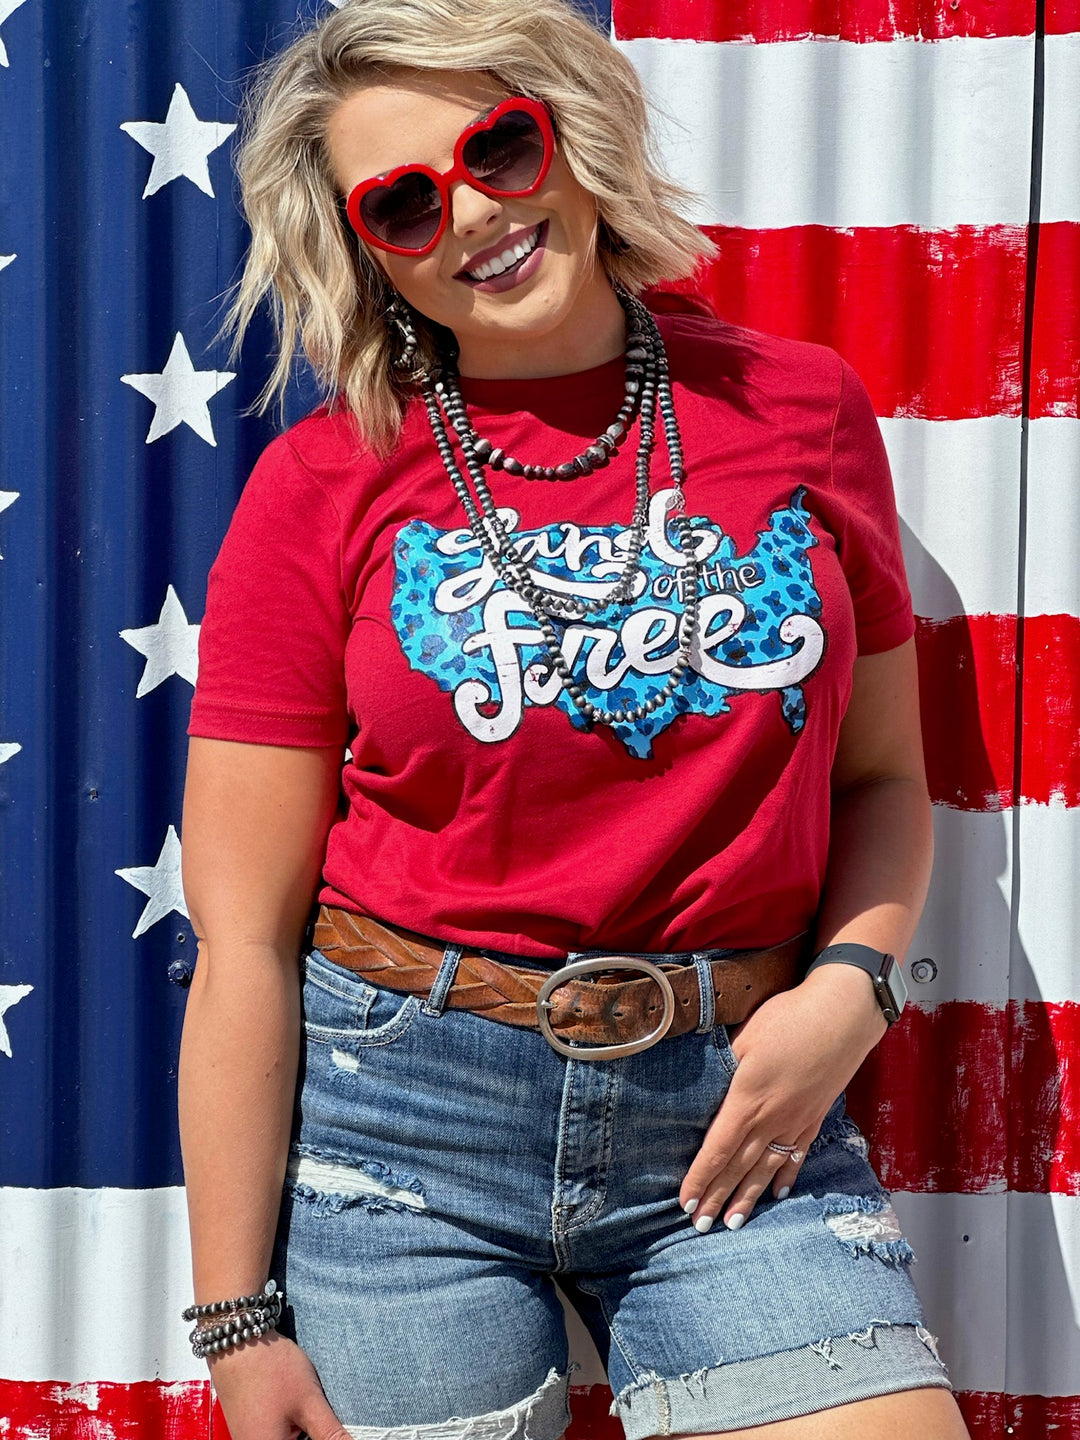 Land of the Free Red Graphic Tee by Texas True Threads